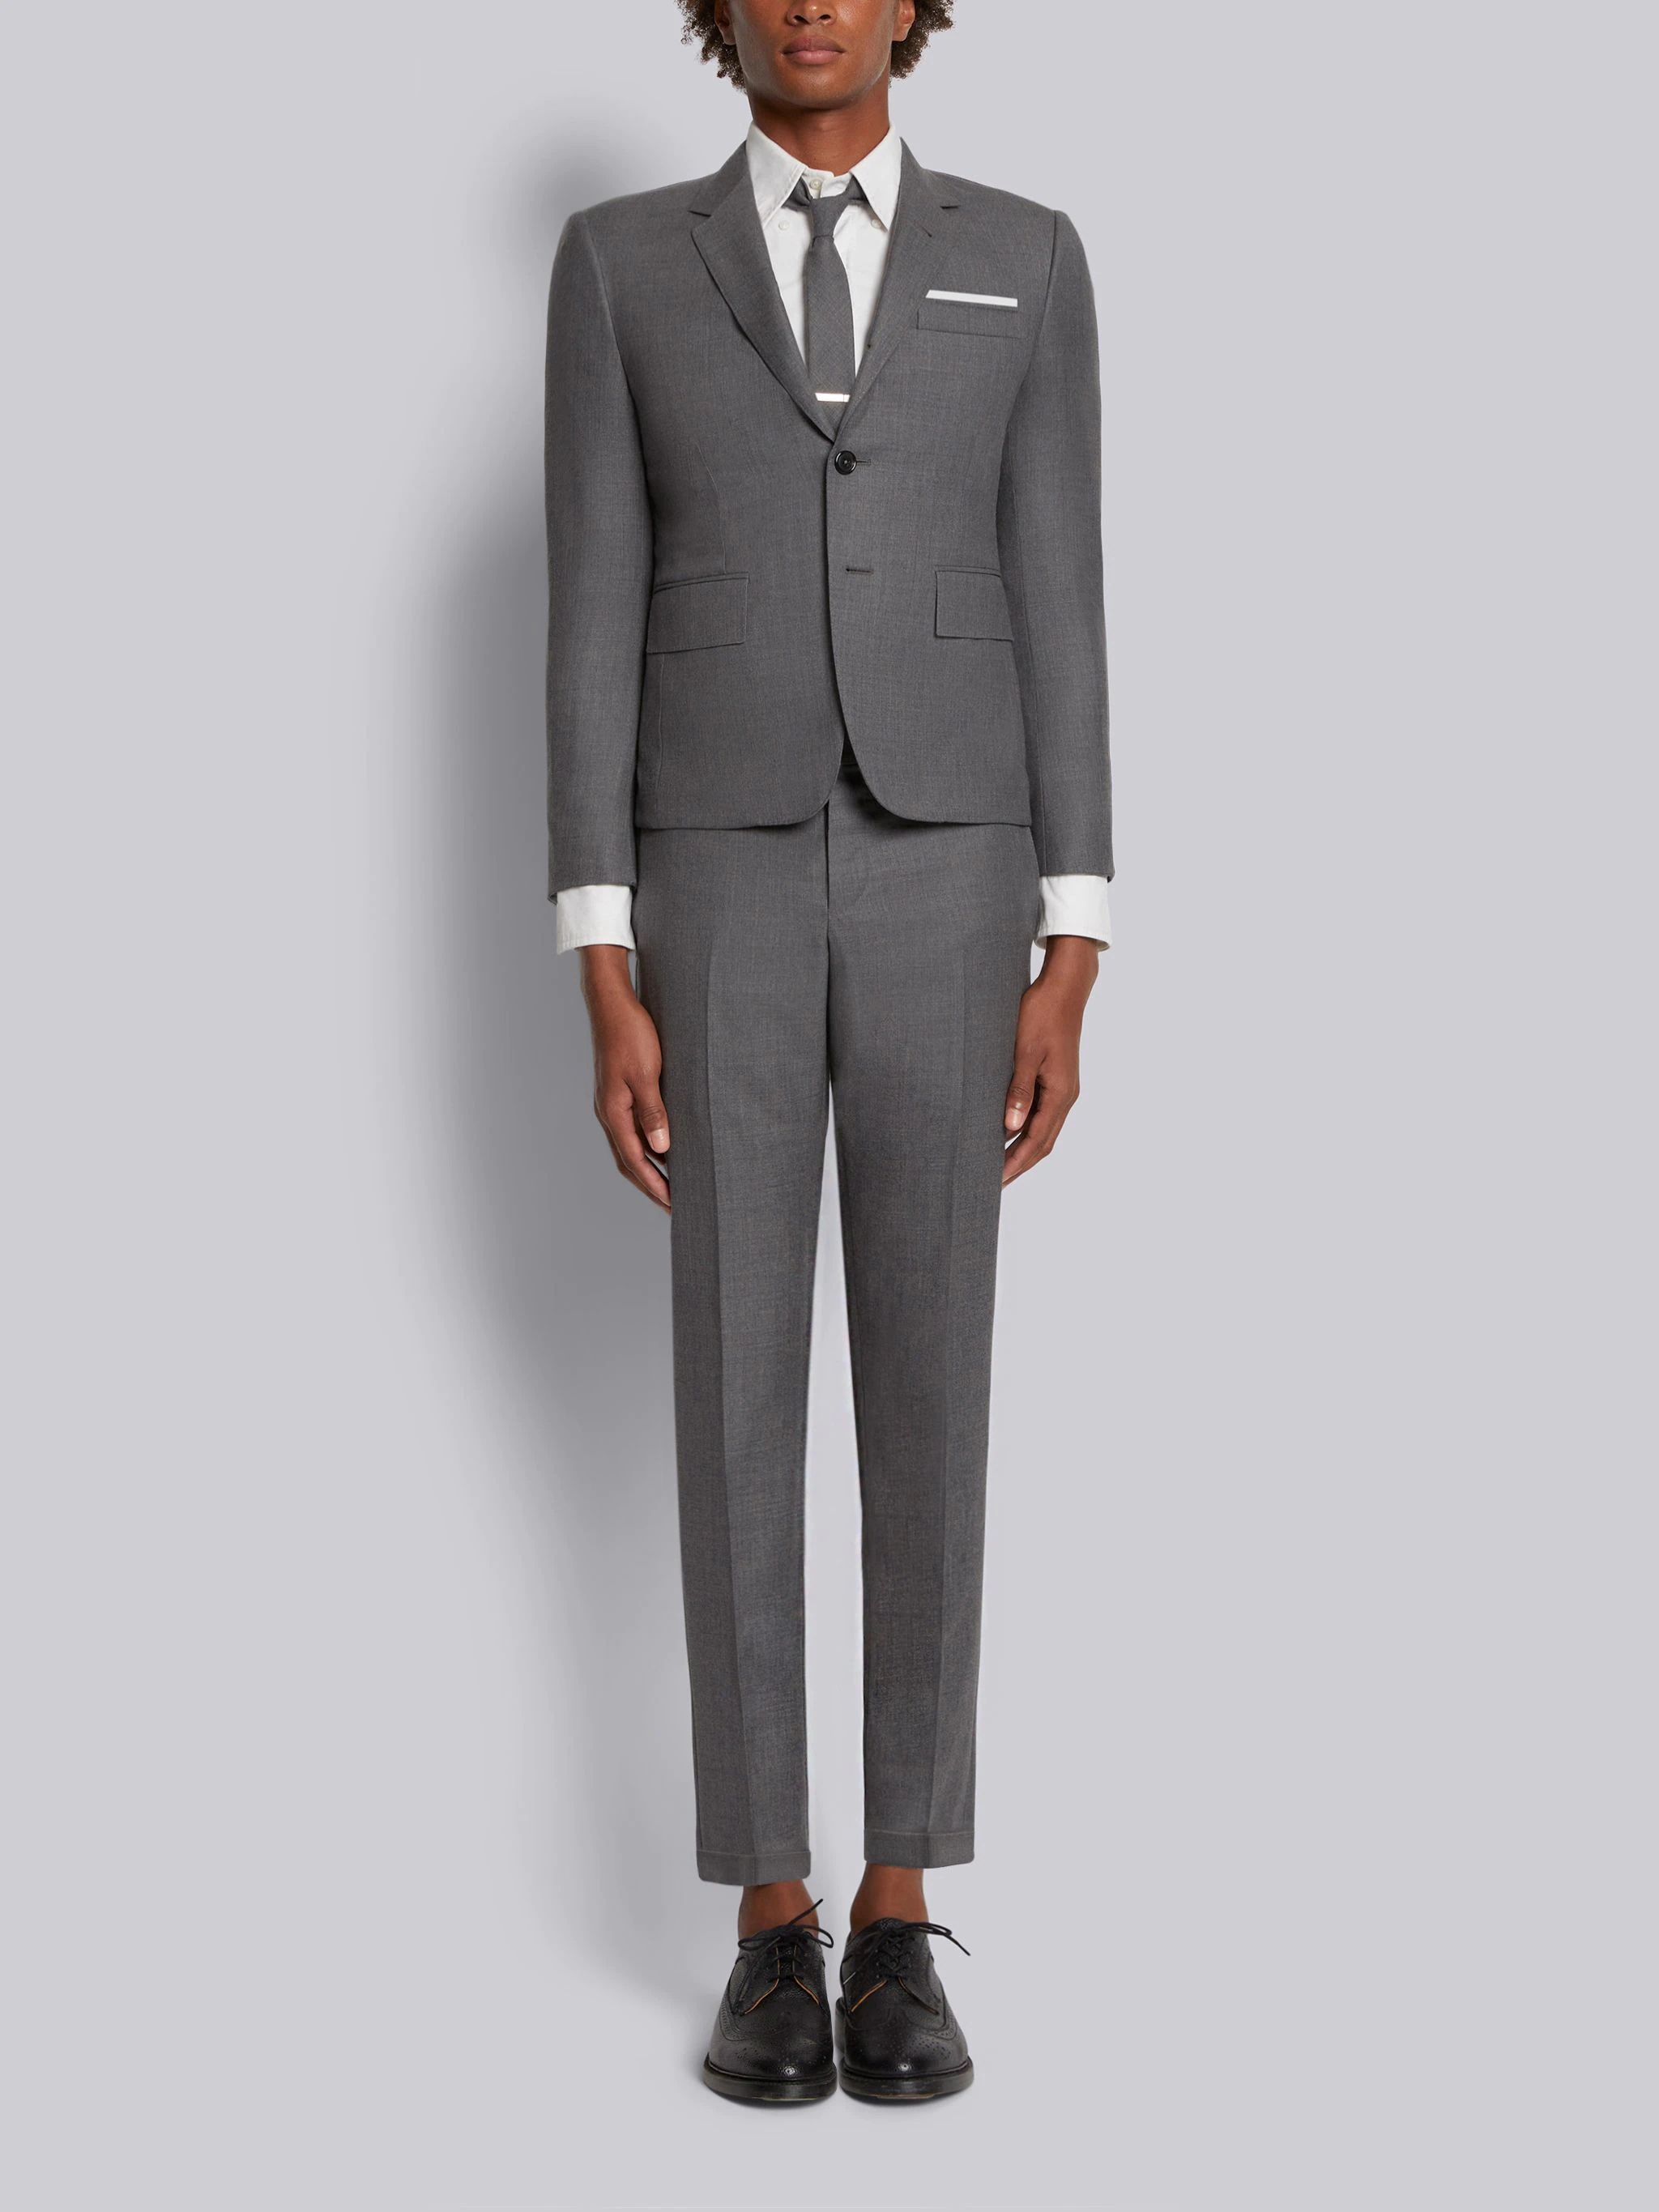 Medium Grey Super 120s Twill High Armhole Suit With Tie And Low Rise Skinny Trouser - 1